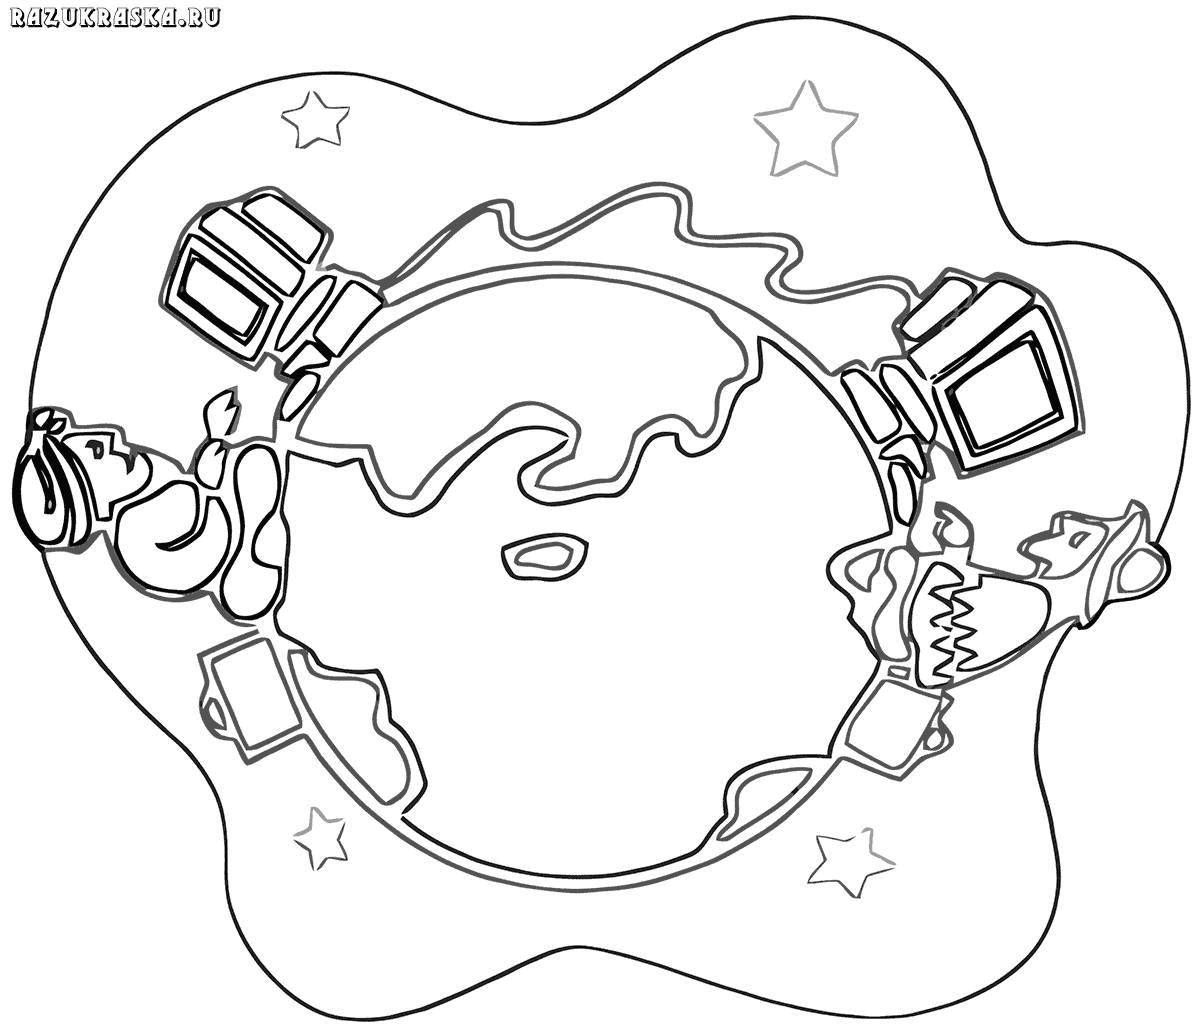 Internet safety fun coloring page